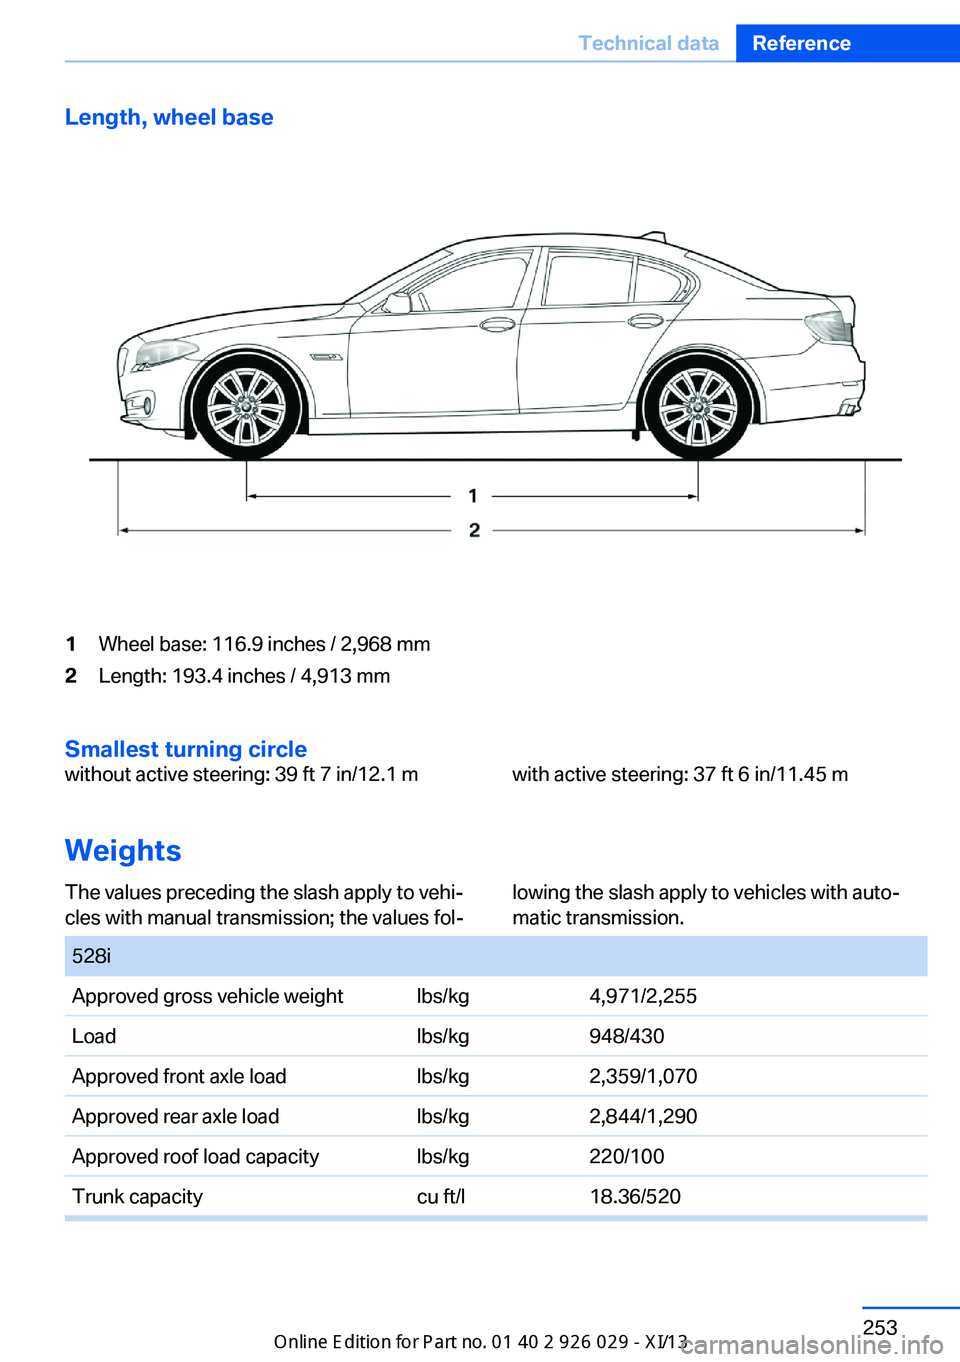 BMW 5 SERIES 2013 F10 Owners Manual Length, wheel base1Wheel base: 116.9 inches / 2,968 mm2Length: 193.4 inches / 4,913 mm
Smallest turning circle
without active steering: 39 ft 7 in/12.1 mwith active steering: 37 ft 6 in/11.45 m
Weight